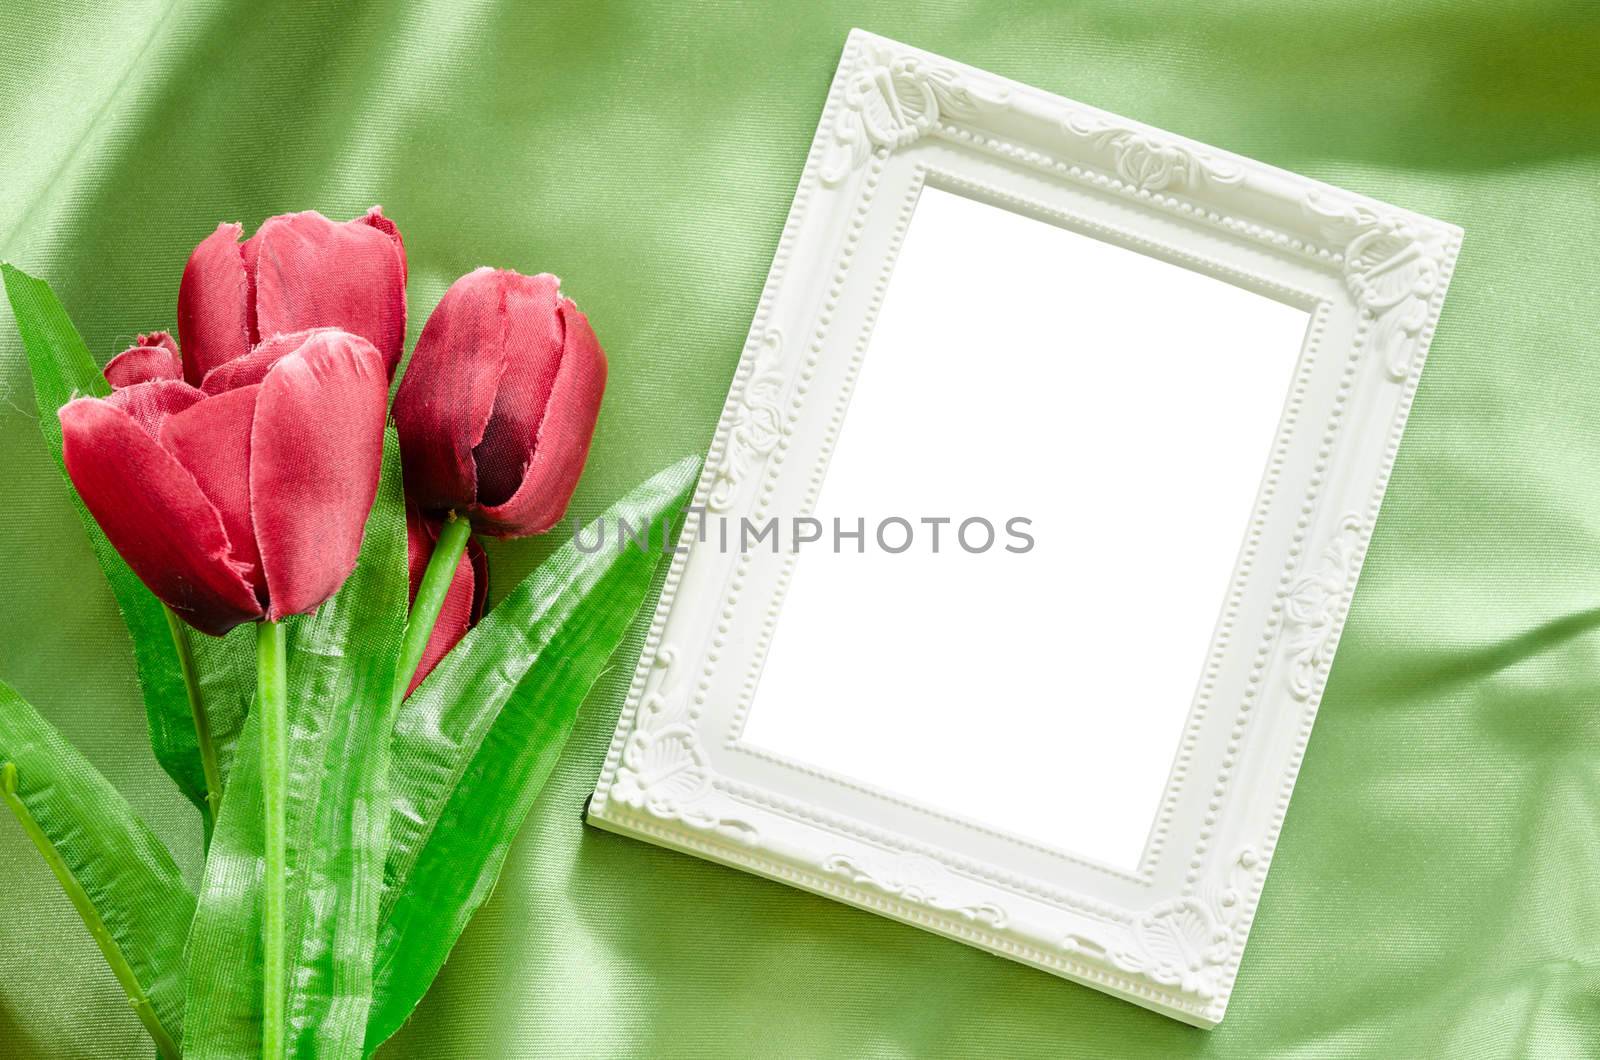 Blank Picture frames and red tulips flowers on green green silk fabric background. save clipping path.